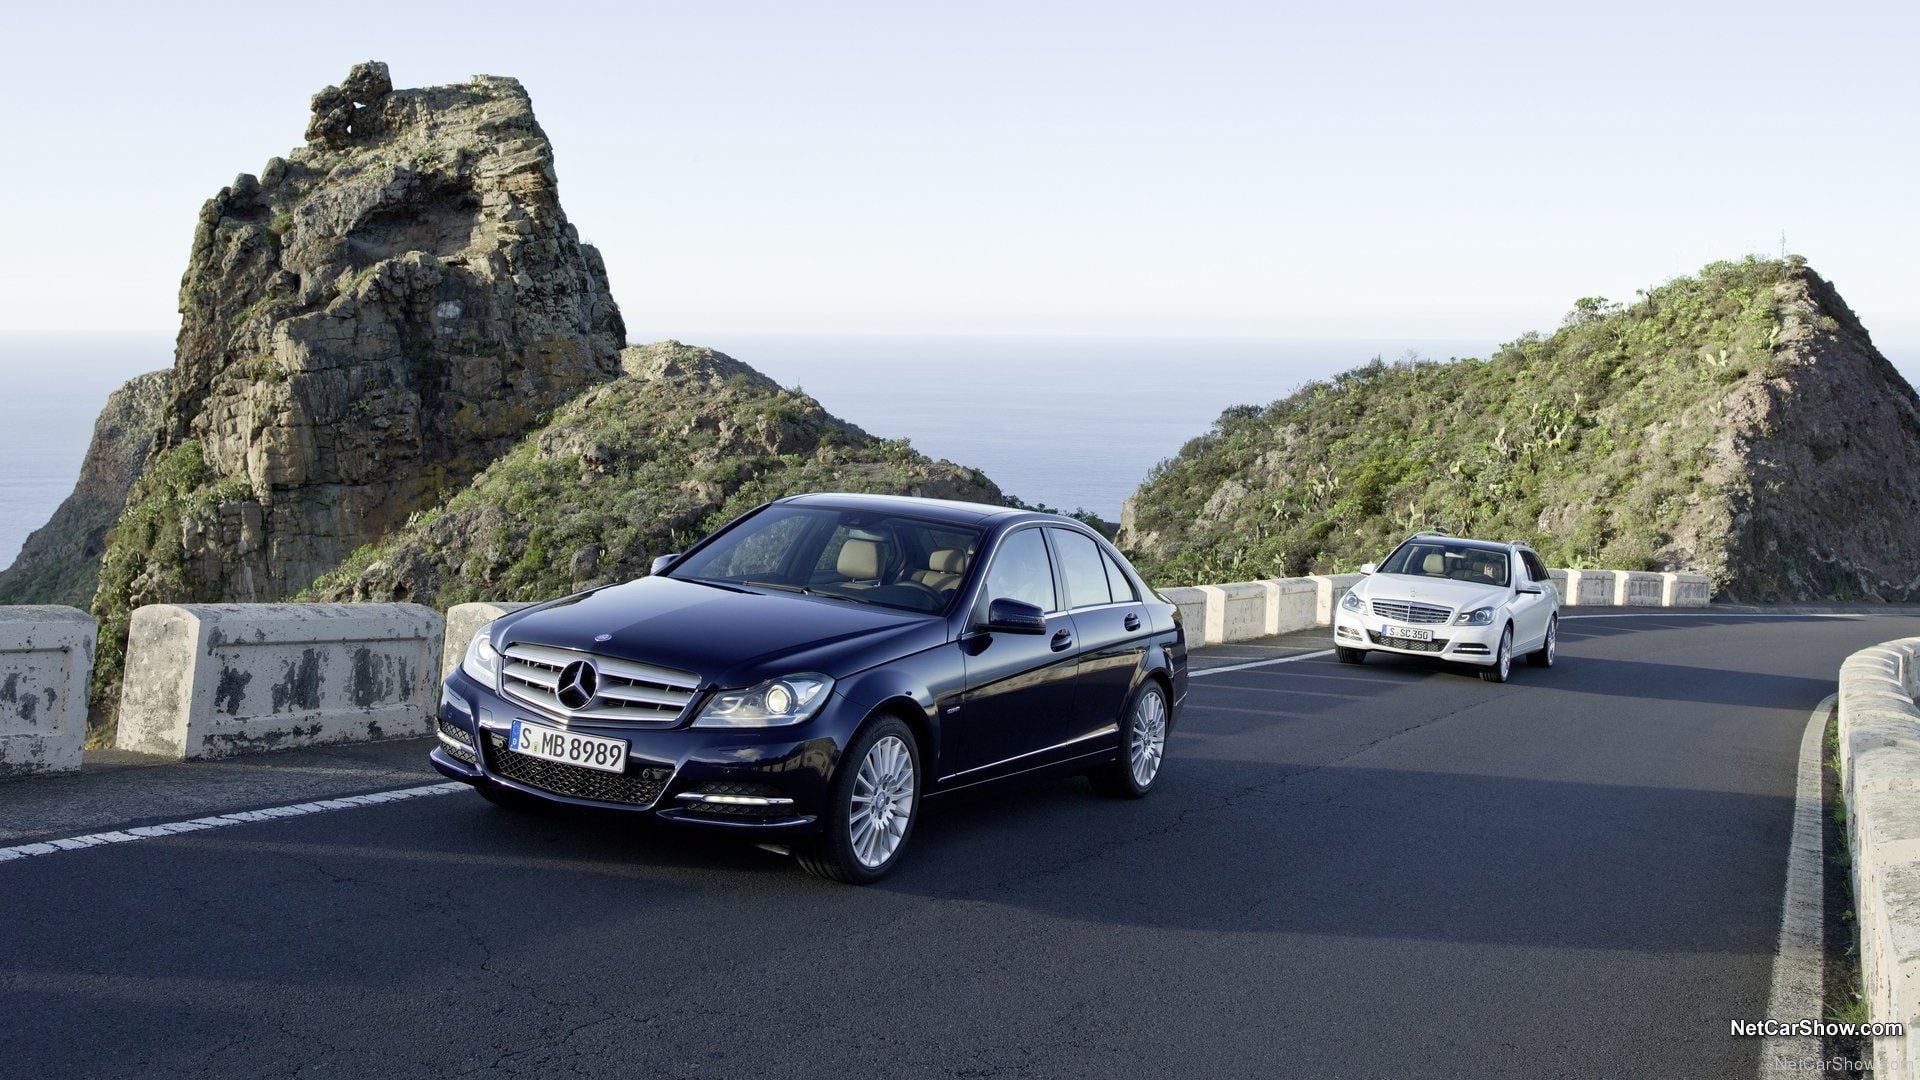 Mercedes-Benz C-Class: General Info and Specifications